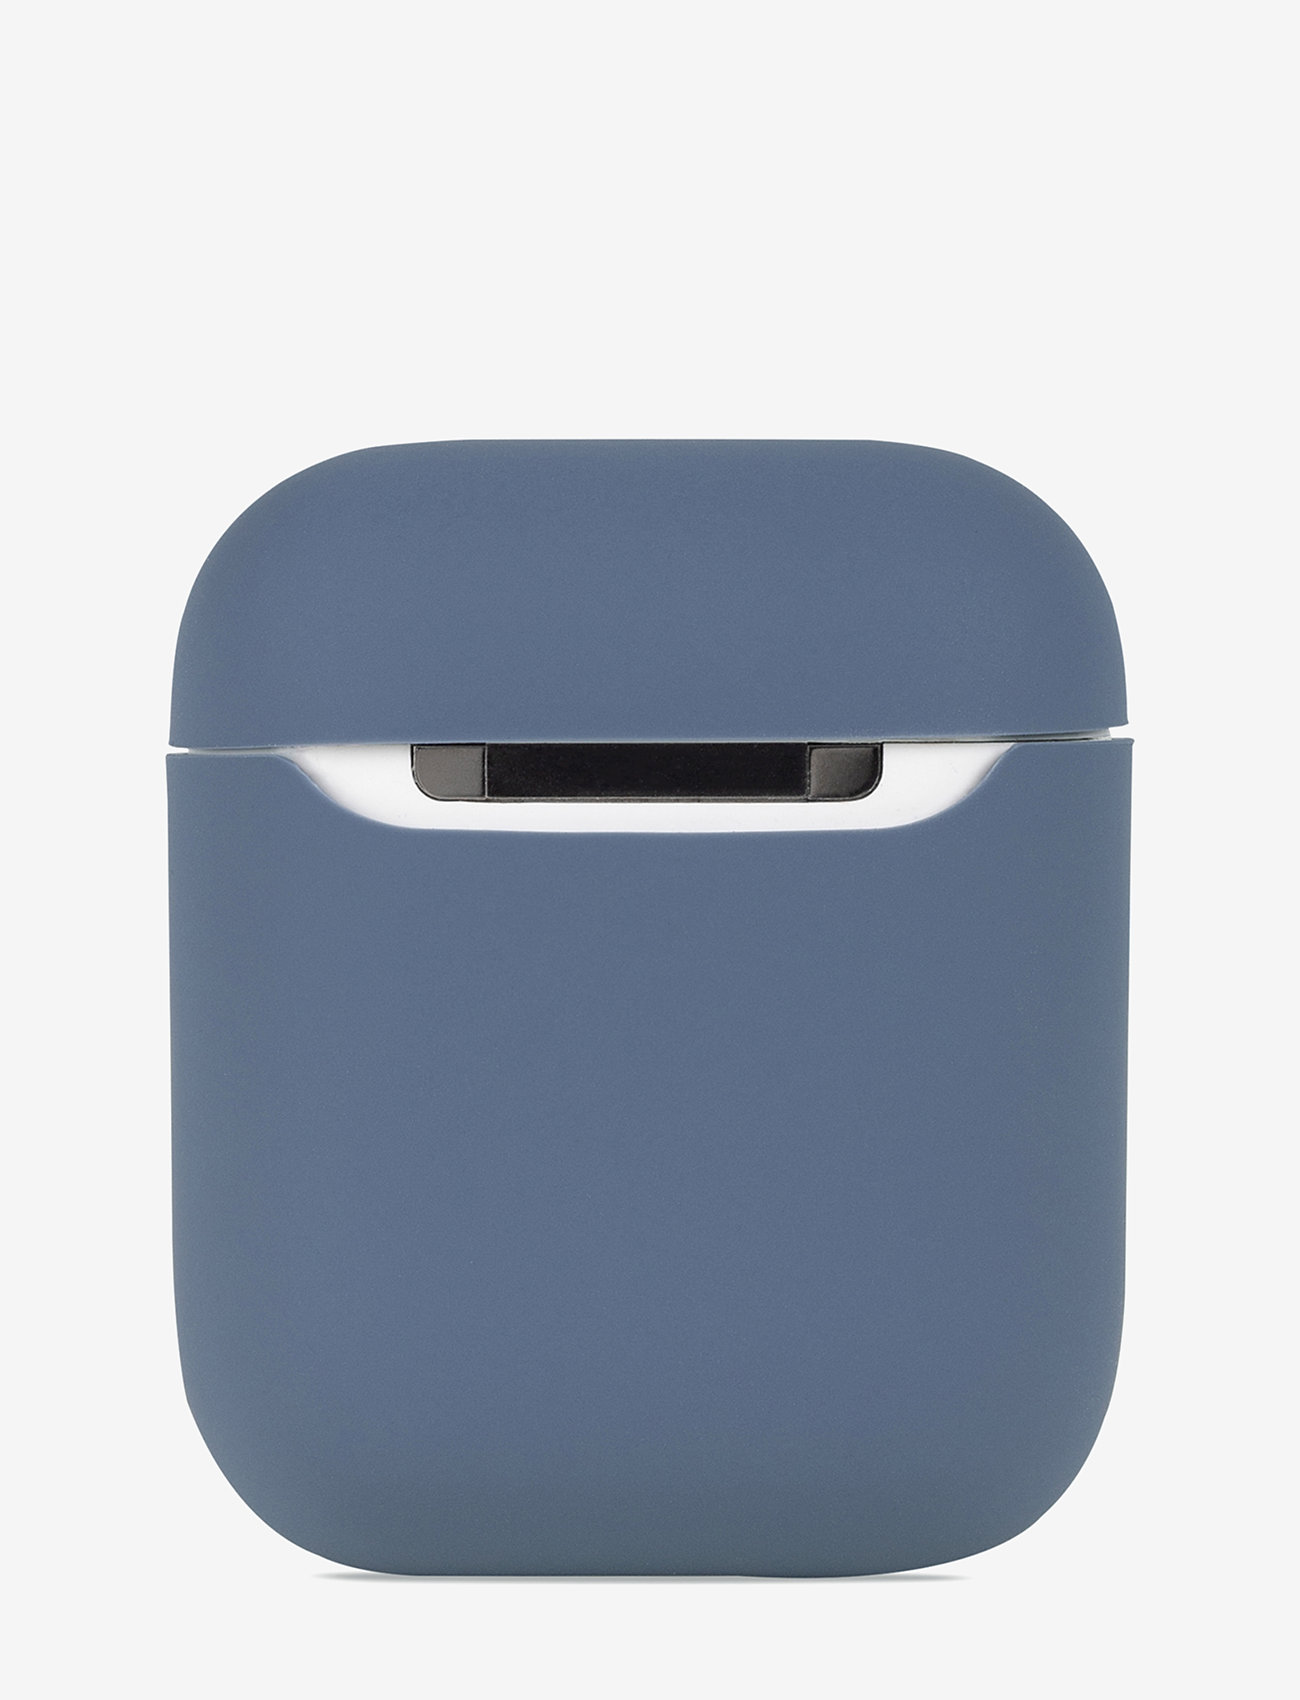 Holdit - Silicone Case AirPods - alhaisimmat hinnat - nygård pacific blue - 1